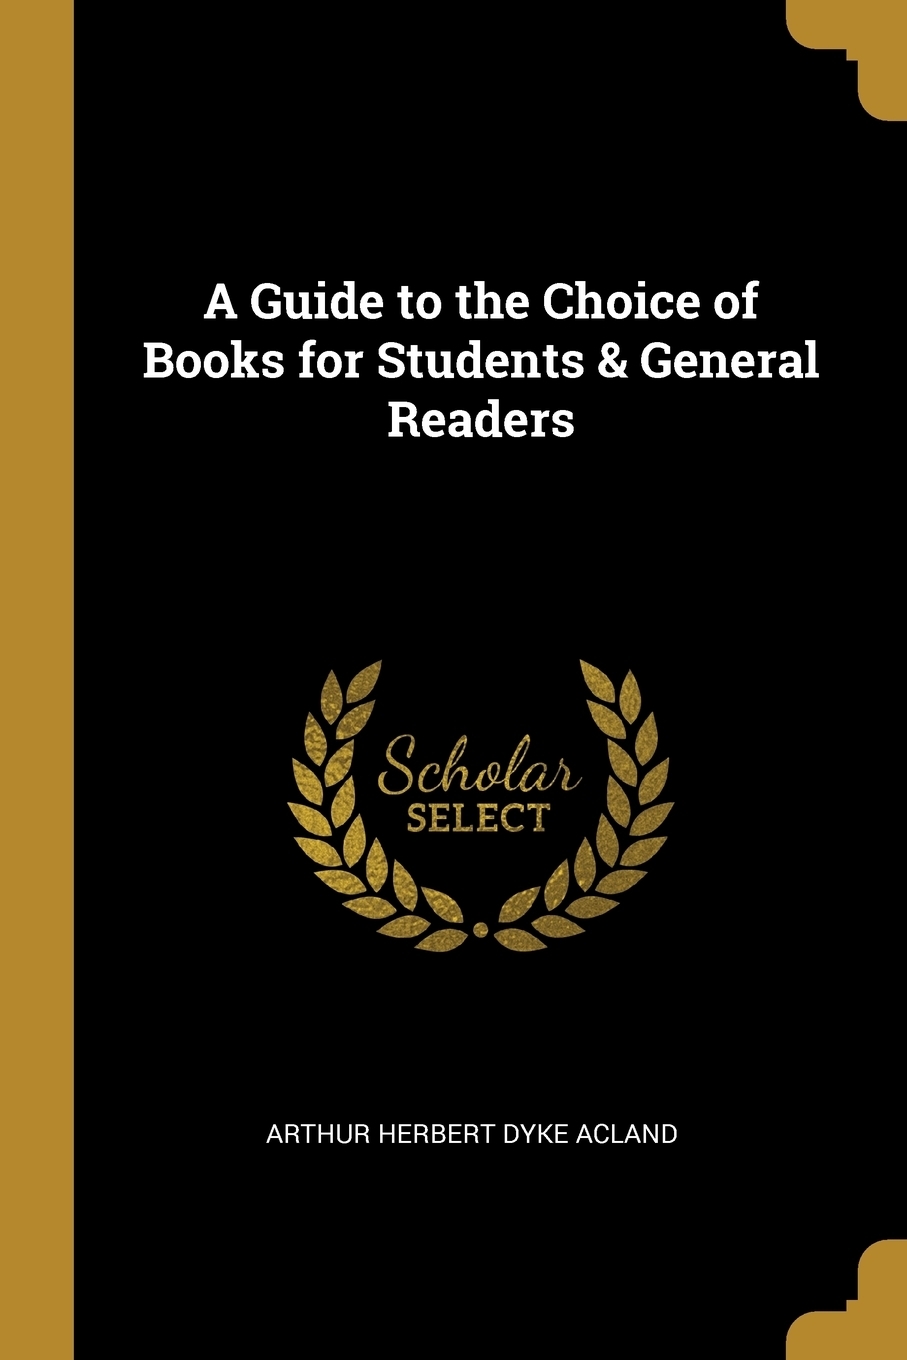 a-guide-to-the-choice-of-books-for-students-general-readers